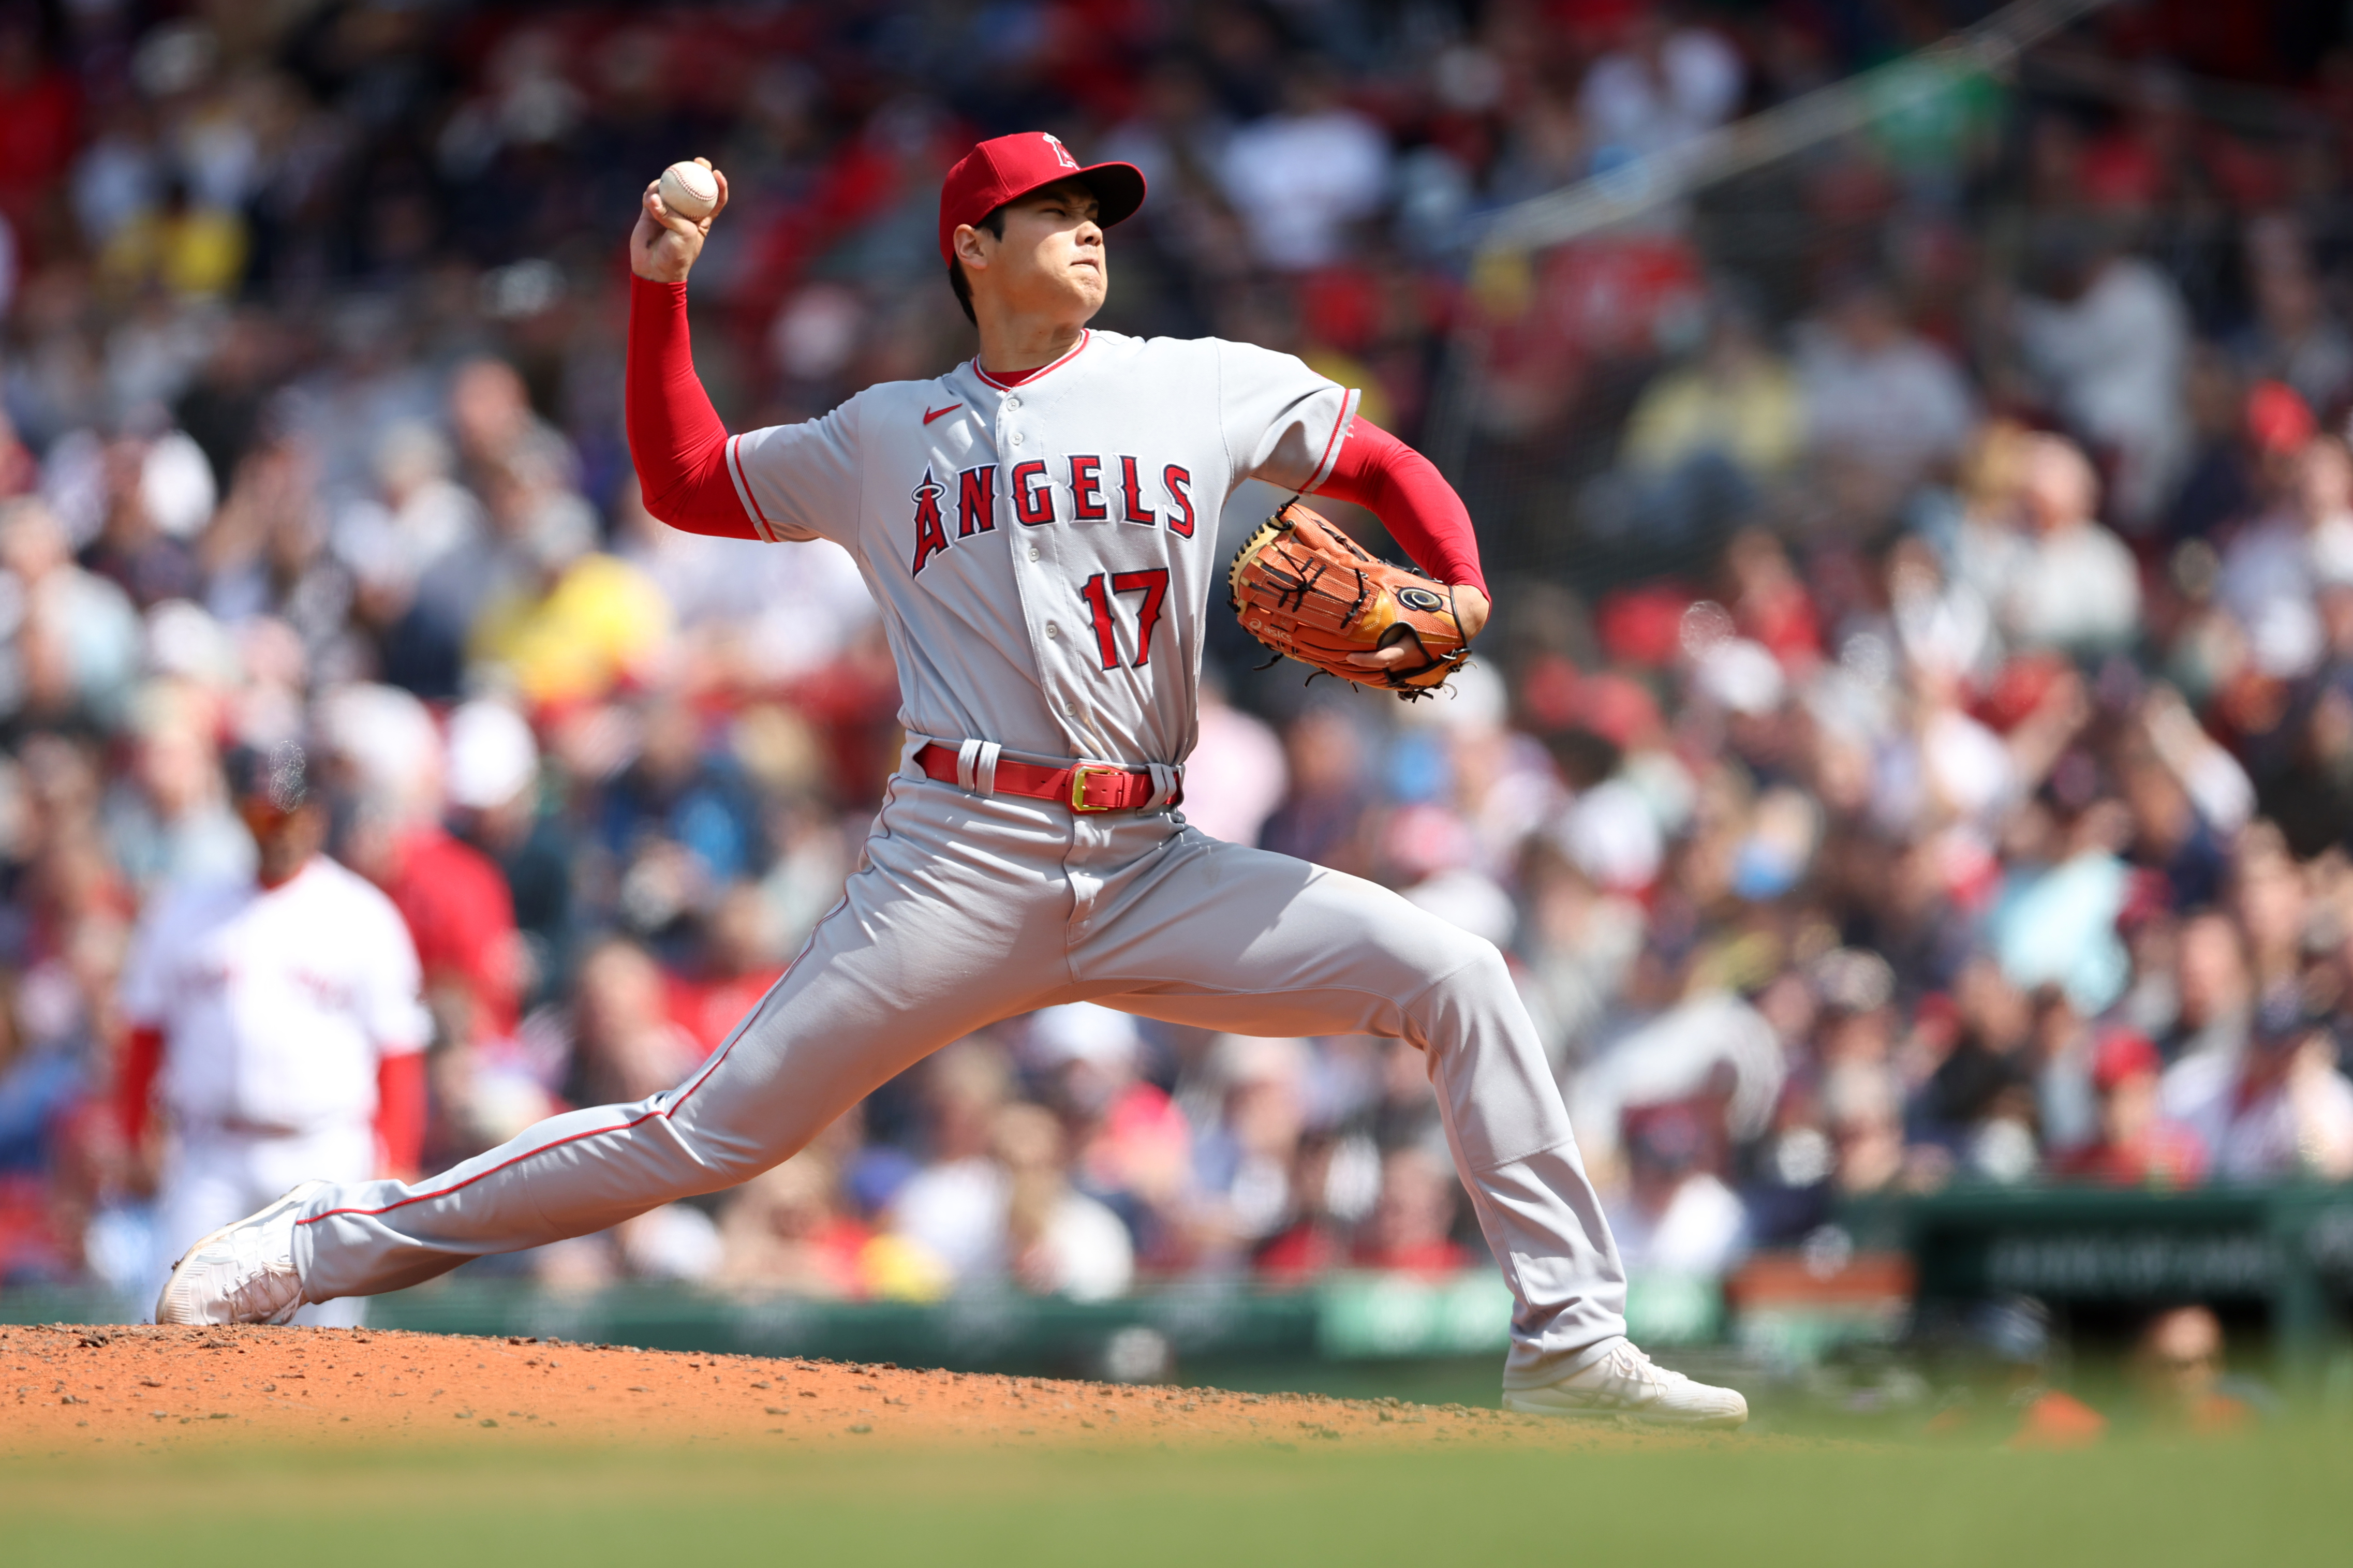 Shohei Ohtani will pitch vs. Red Sox on Monday at Fenway as Angels